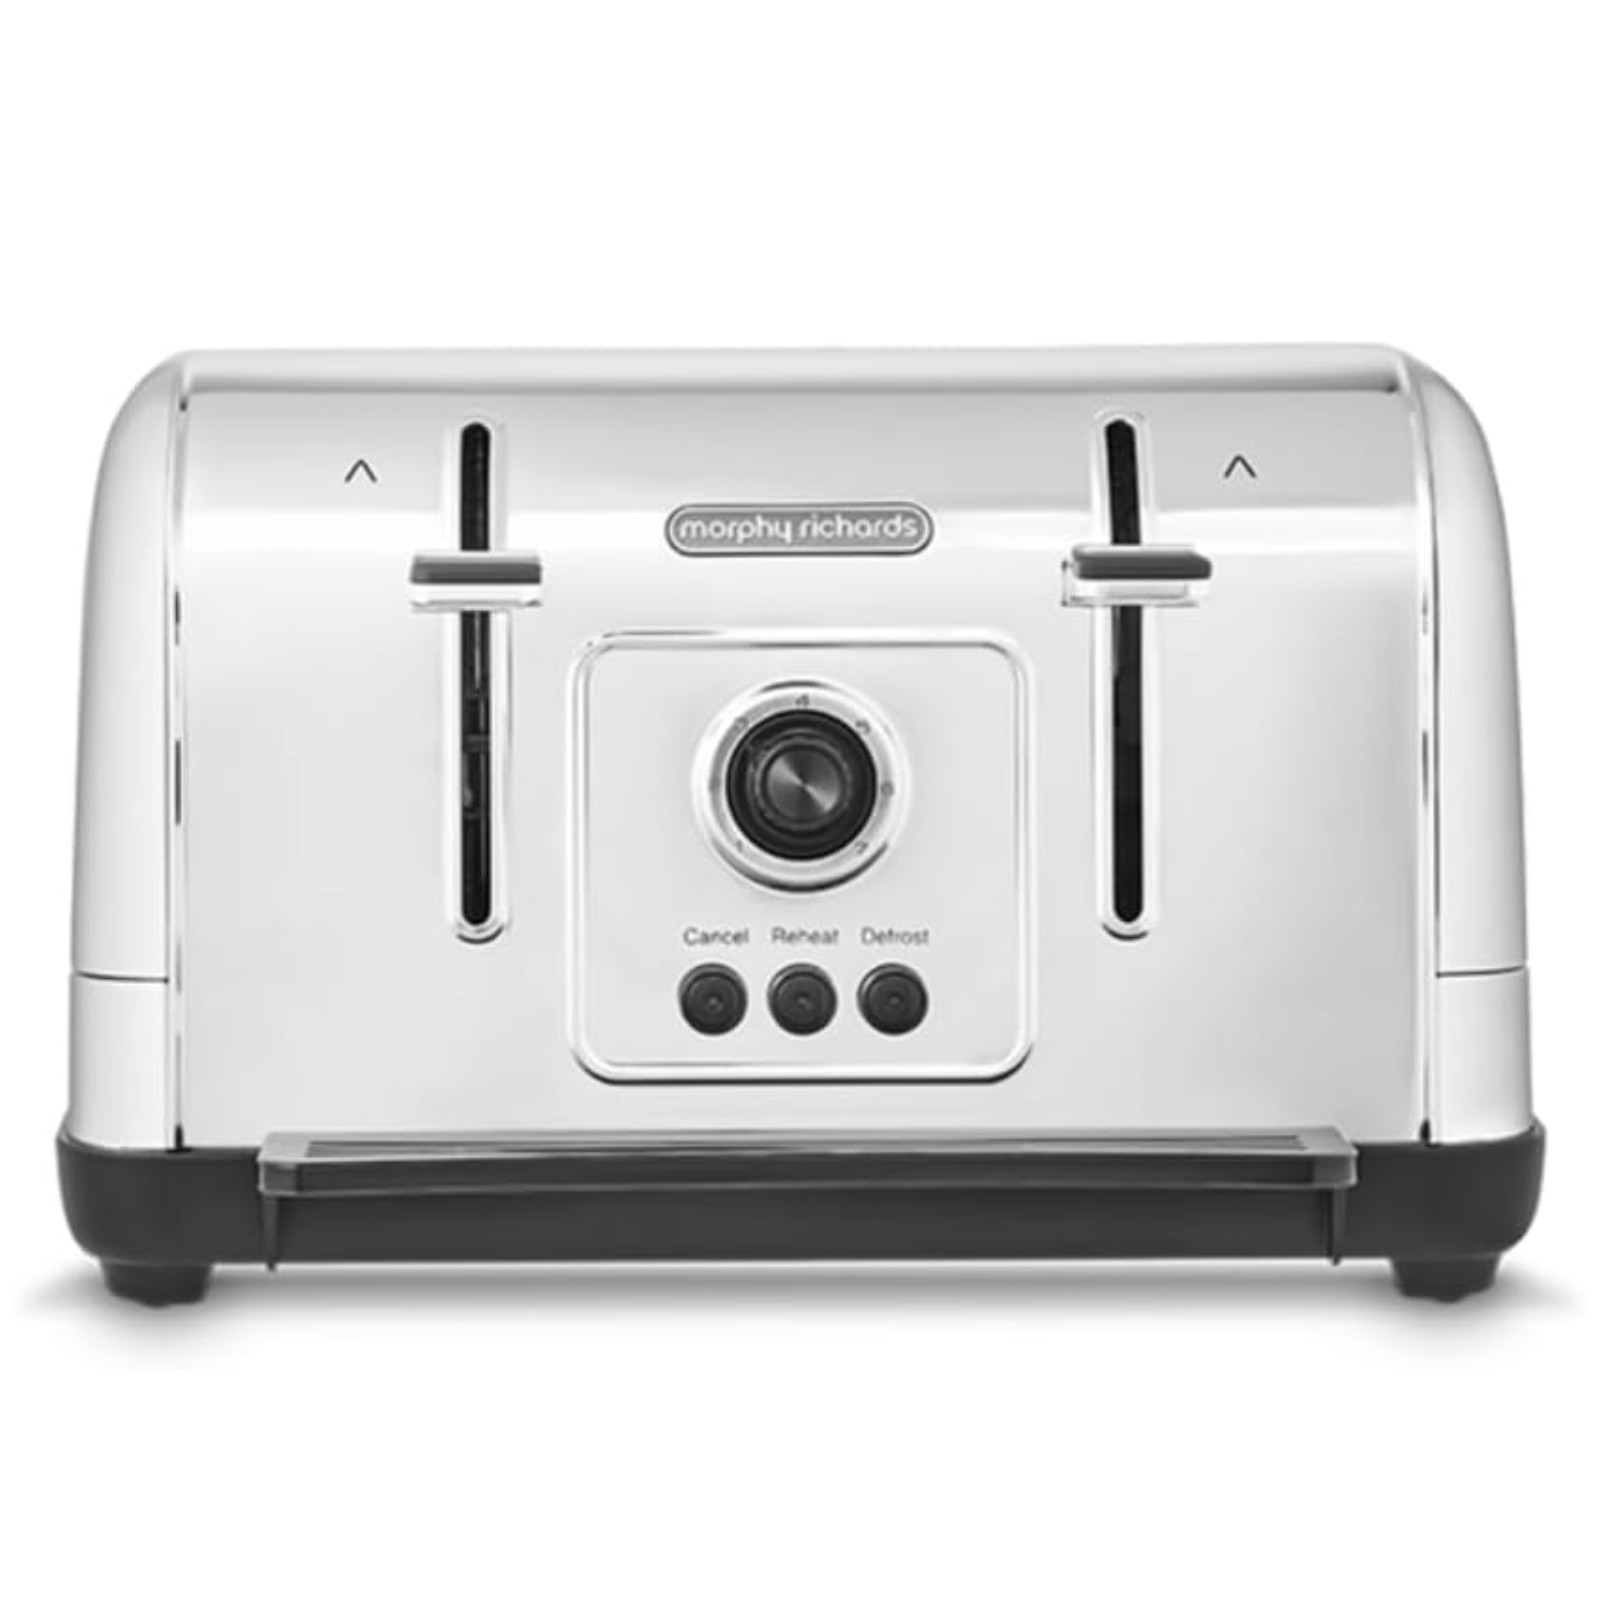 Morphy Richards 240130 Venture Brushed 4 Slice Toaster – Brushed Stainless Steel Brand New